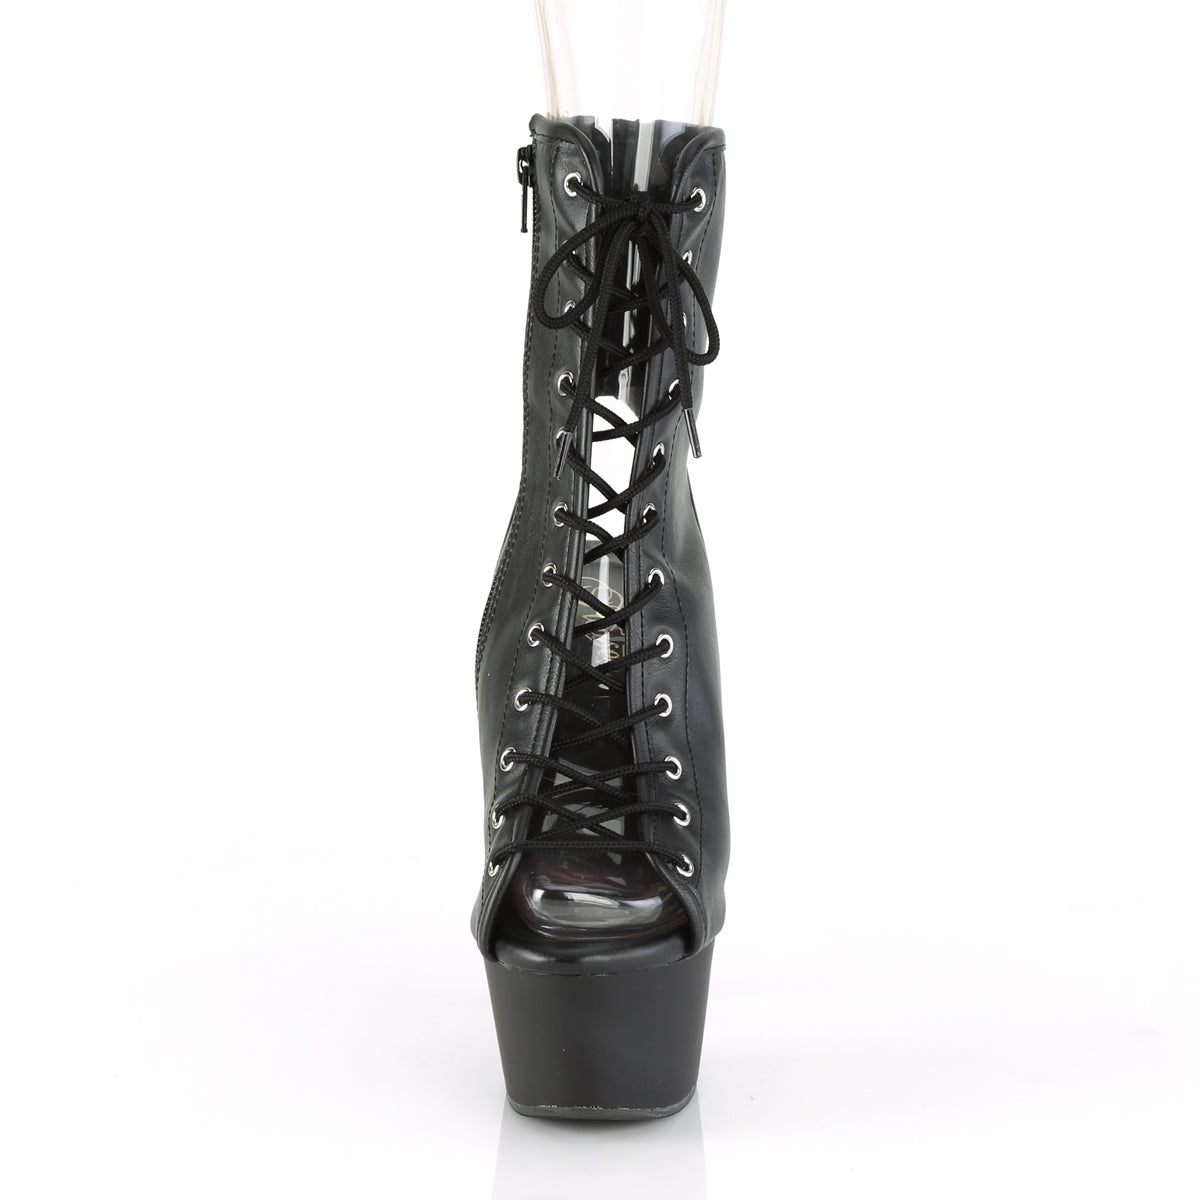 ASPIRE-1016 Black Faux Leather Ankle Boot Pleaser